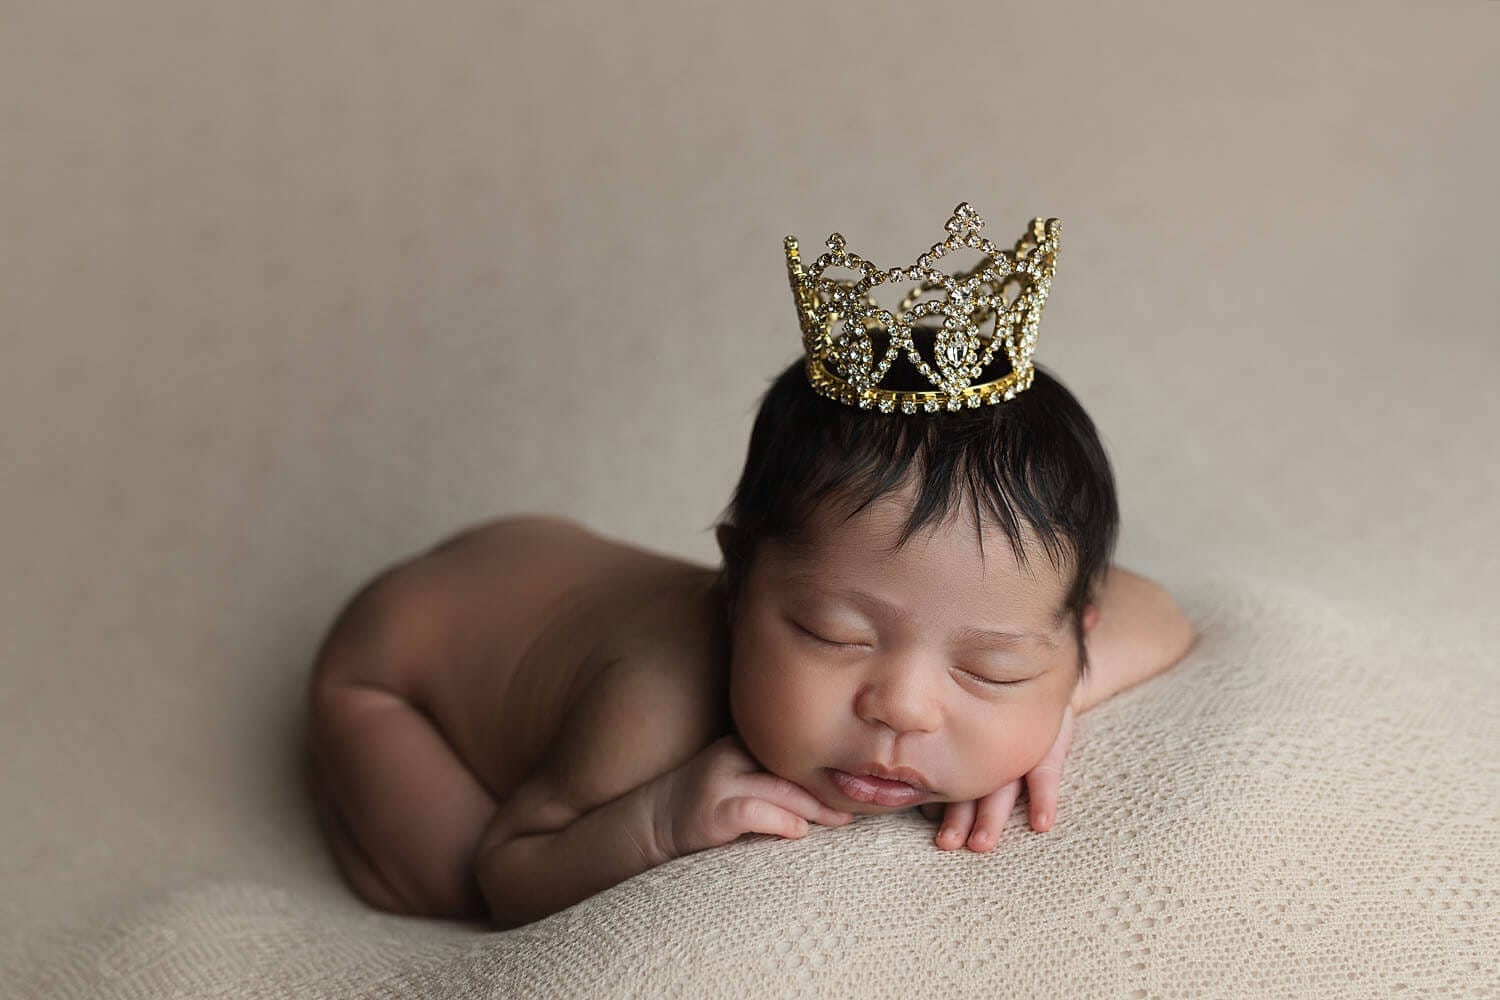 A newborn baby sleeps in froggy pose wearing a gold crown